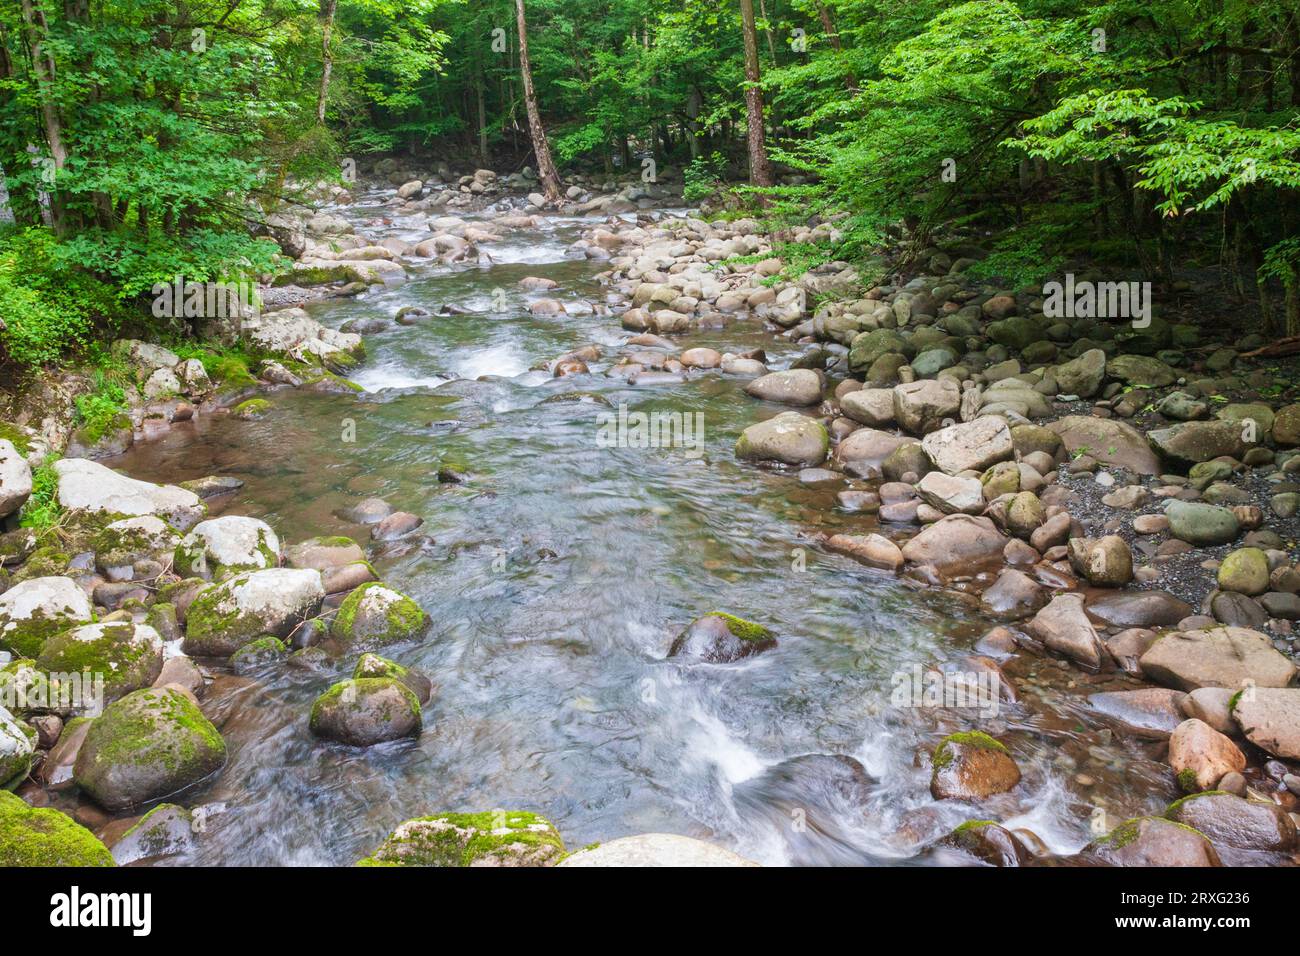 Middle Prong of the Little Pigeon River in the Greenbrier section on the Tennessee side of the Great Smoky Mountains National Park. Stock Photo